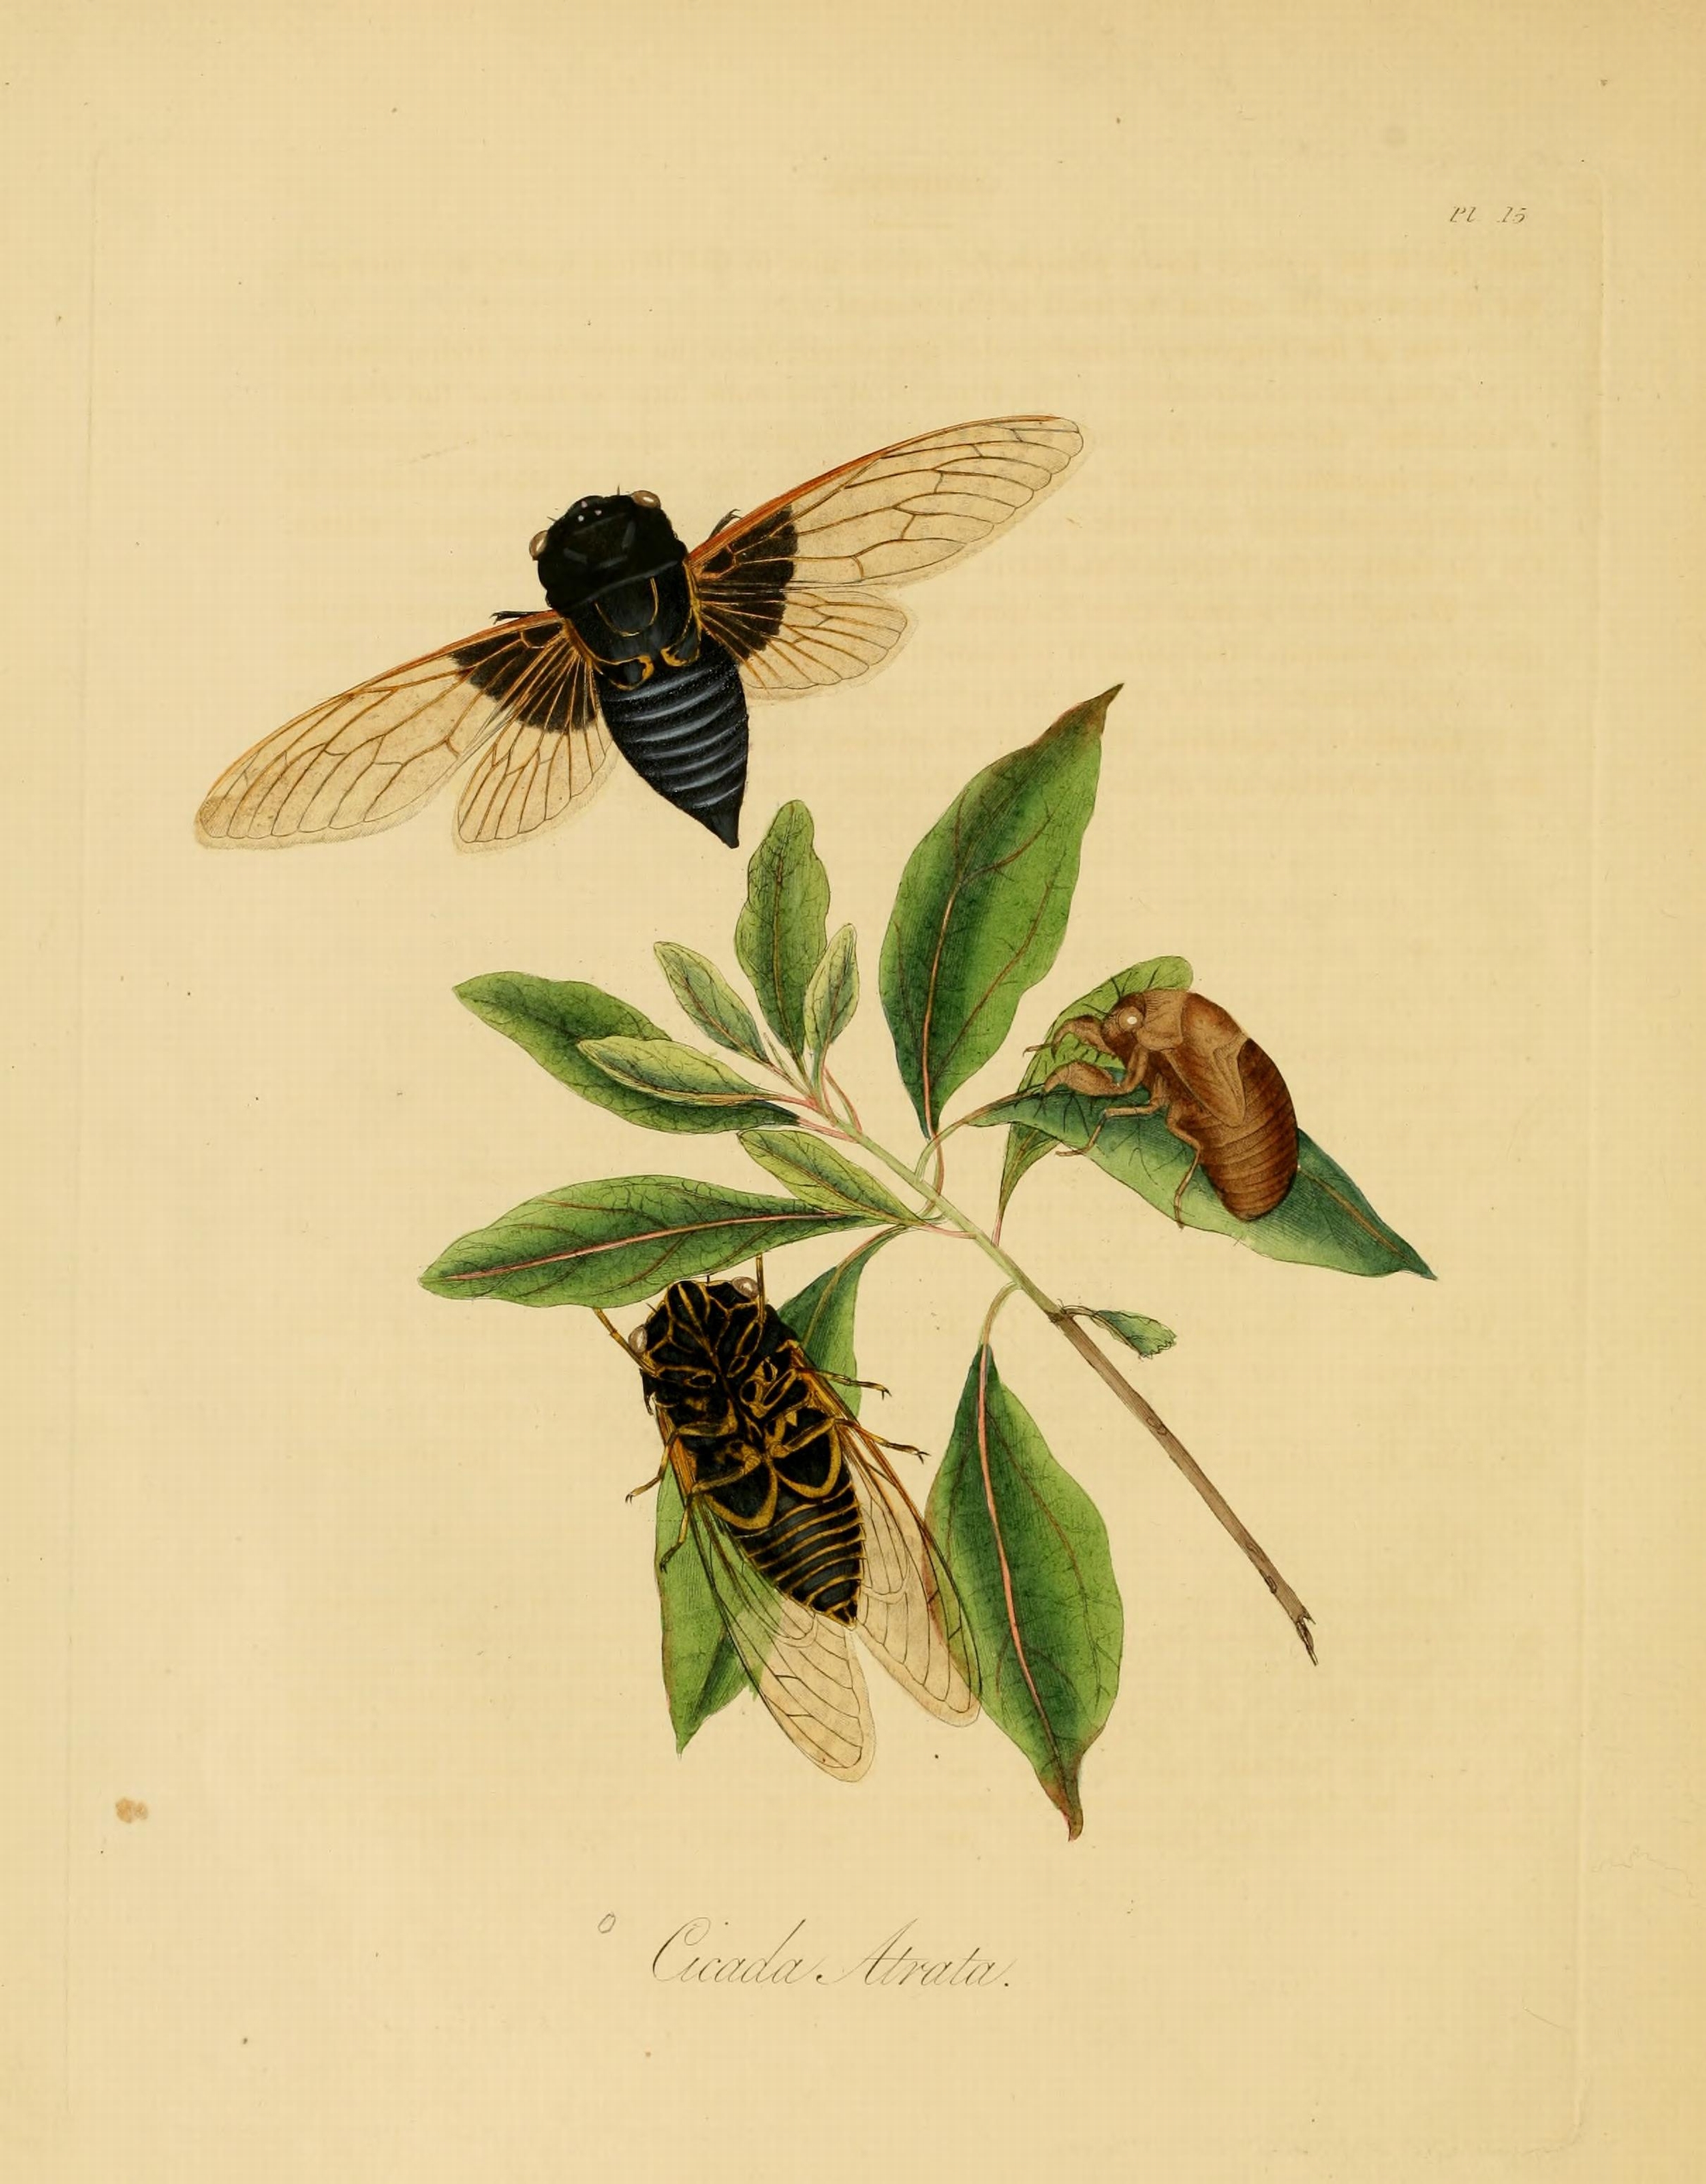 Donovan - Insects of China, 1838 - pl 15